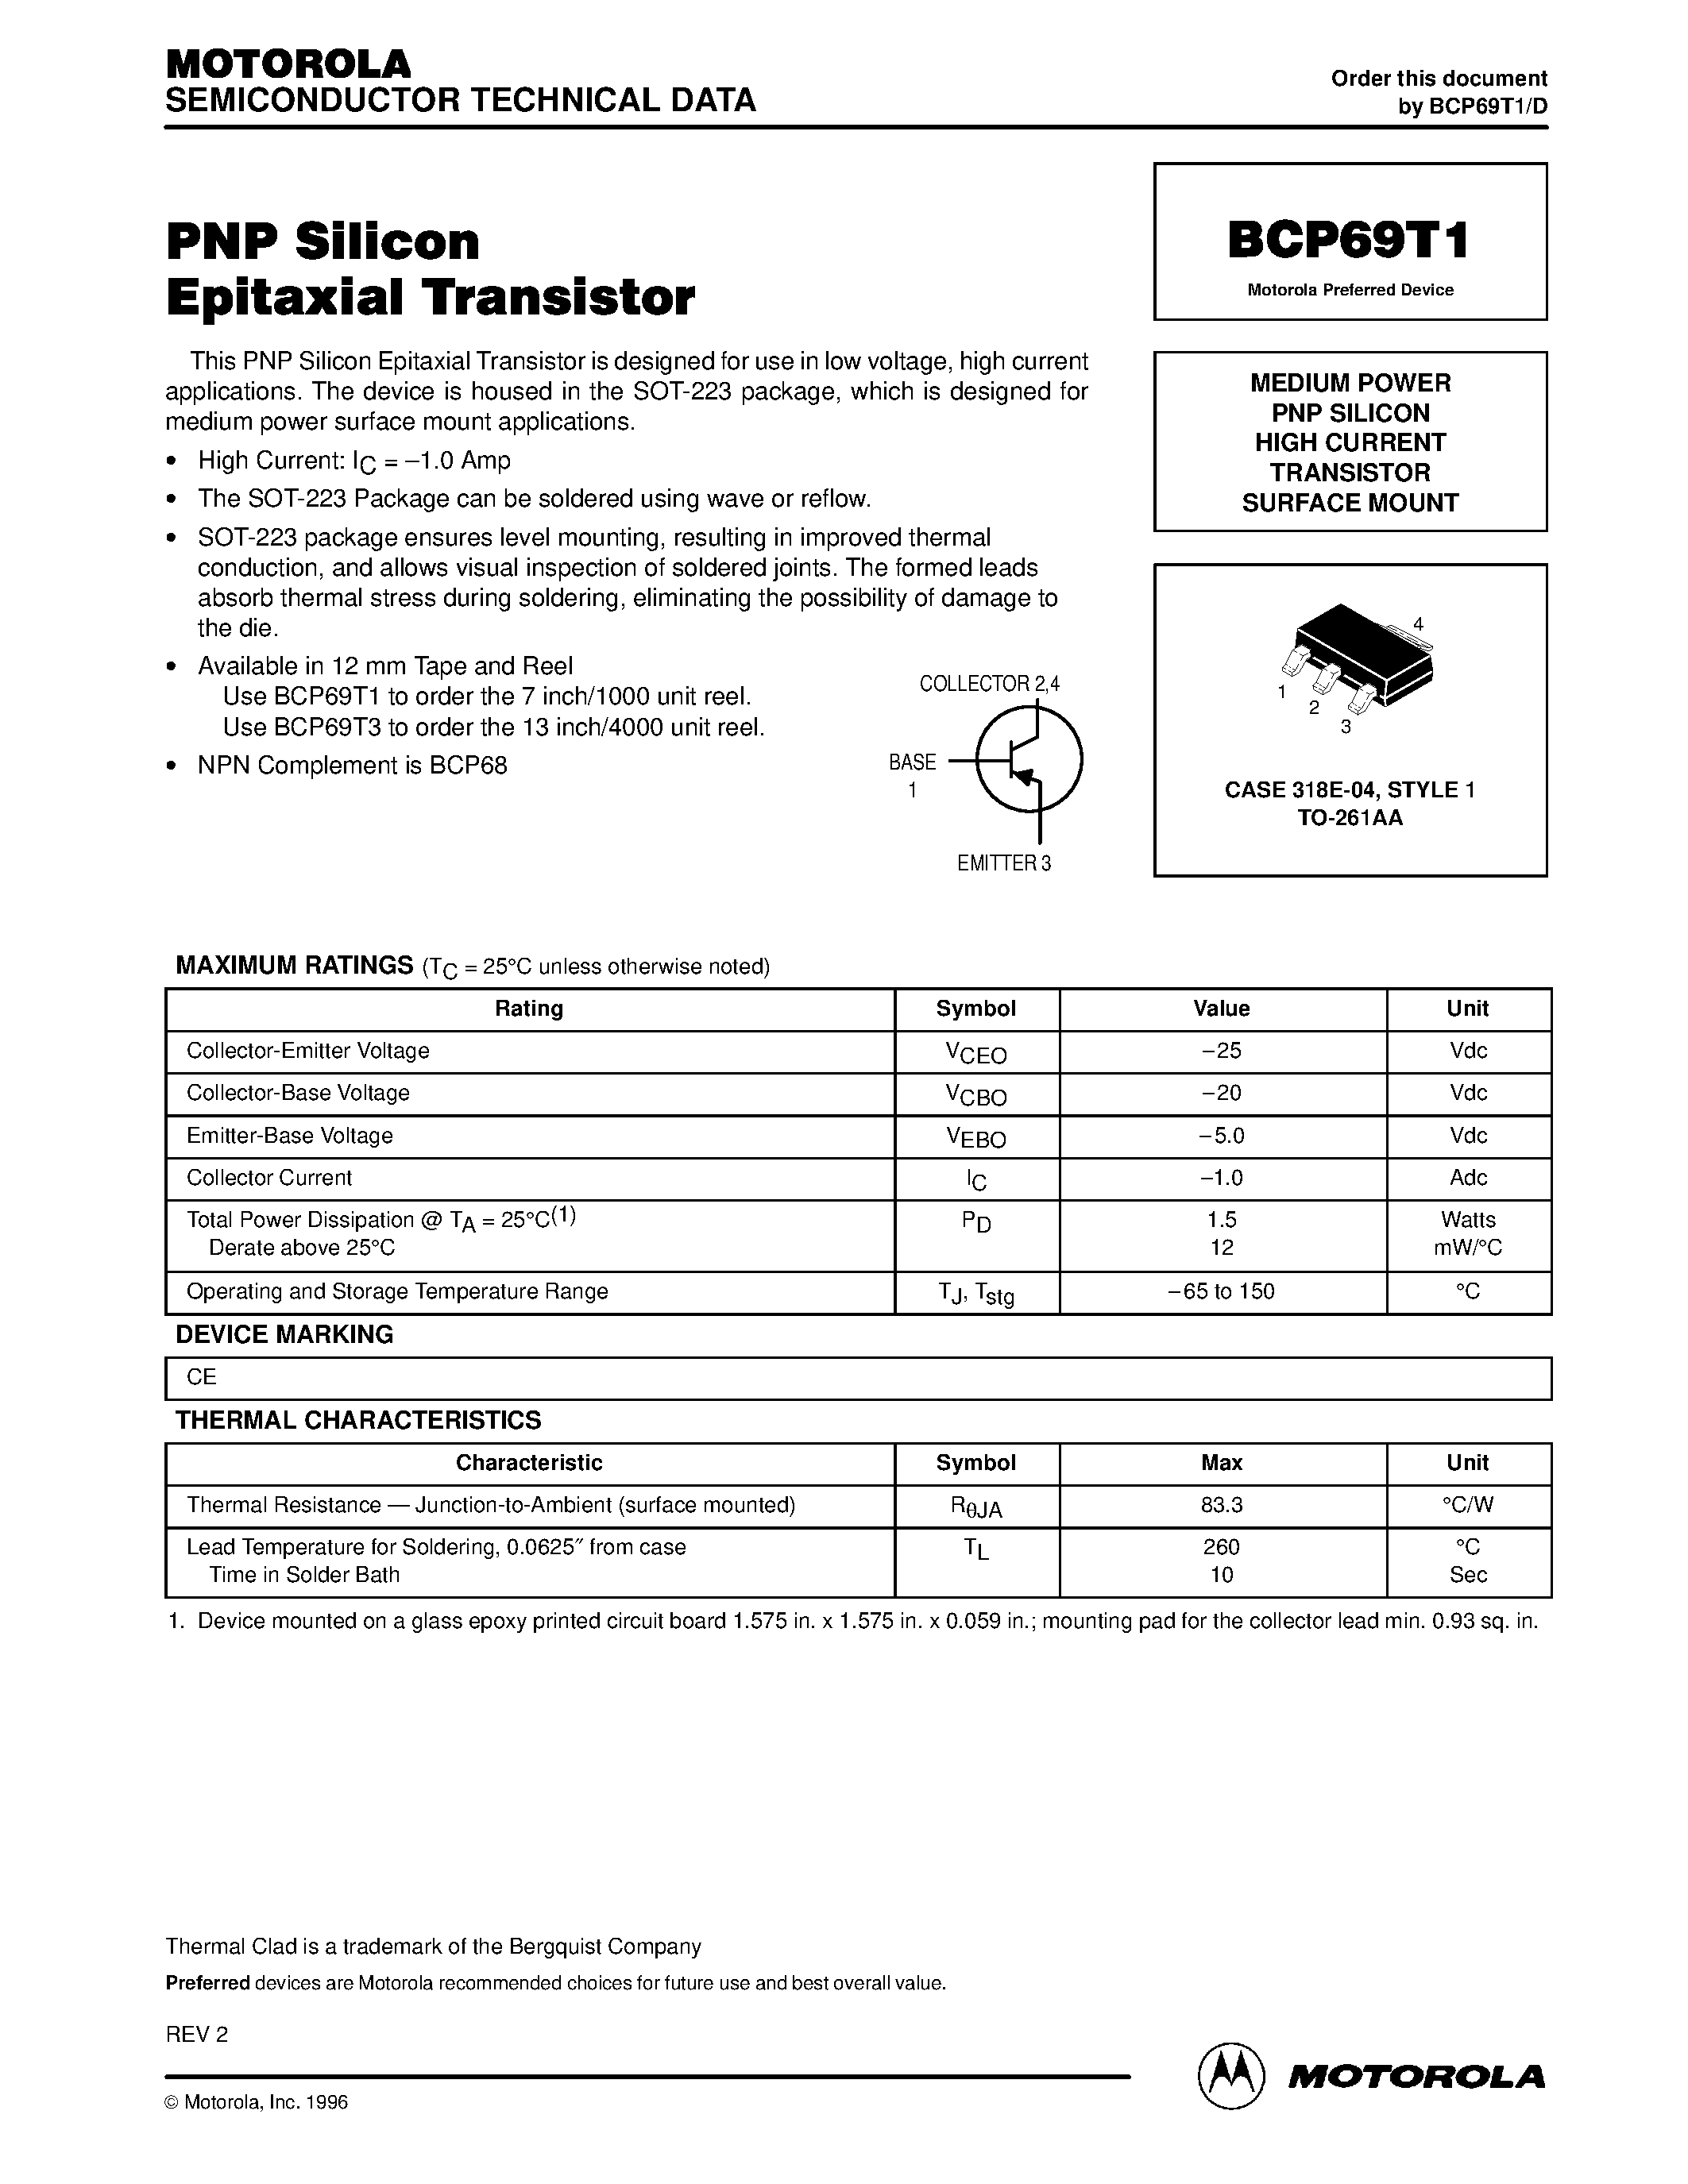 Datasheet BCP69T1 - MEDIUM POWER PNP SILICON HIGH CURRENT TRANSISTOR SURFACE MOUNT page 1